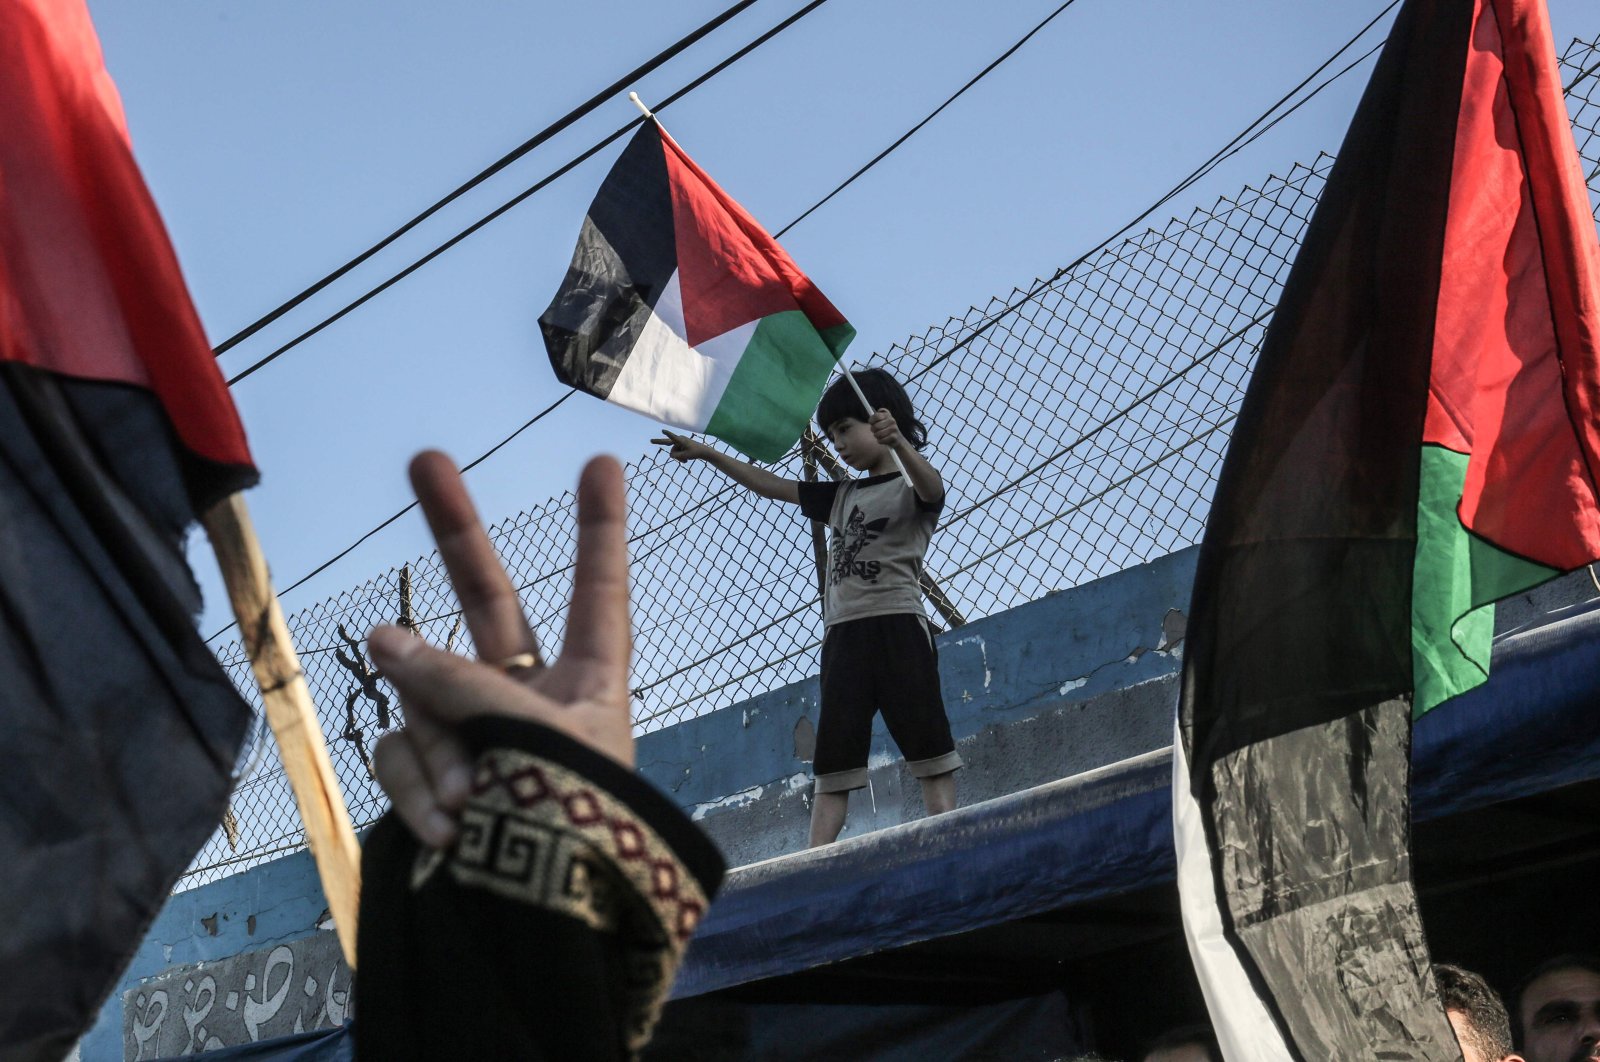 A Palestinian boy waves a national flag during a demonstration against Israel's West Bank annexation plans, in Khan Yunis in the southern Gaza Strip, July 2, 2020. (AFP)